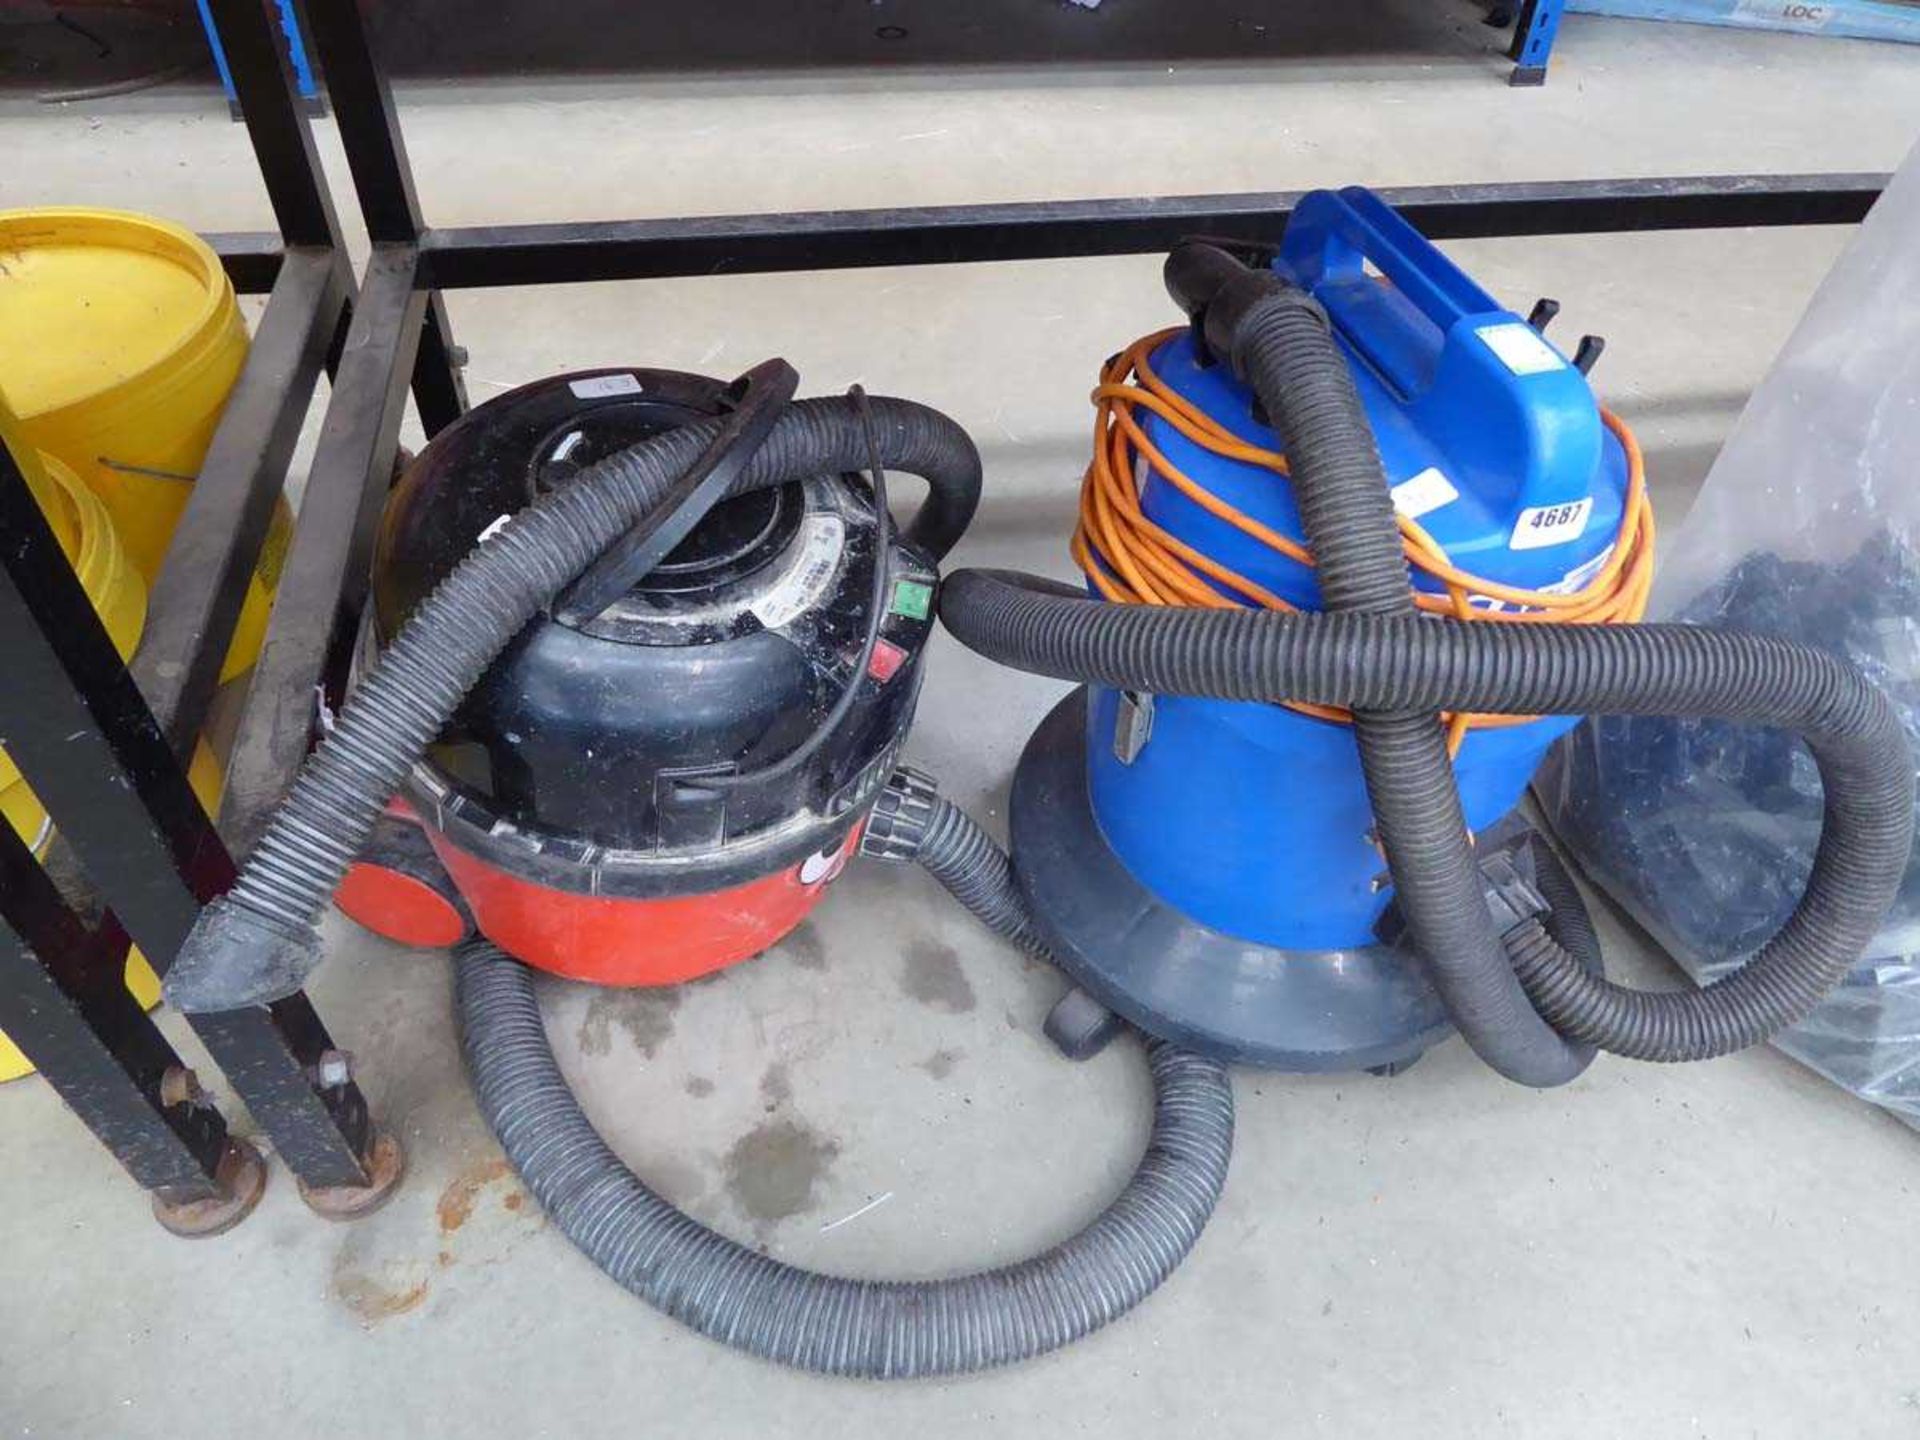 Henry vacuum cleaner and a blue vacuum cleaner